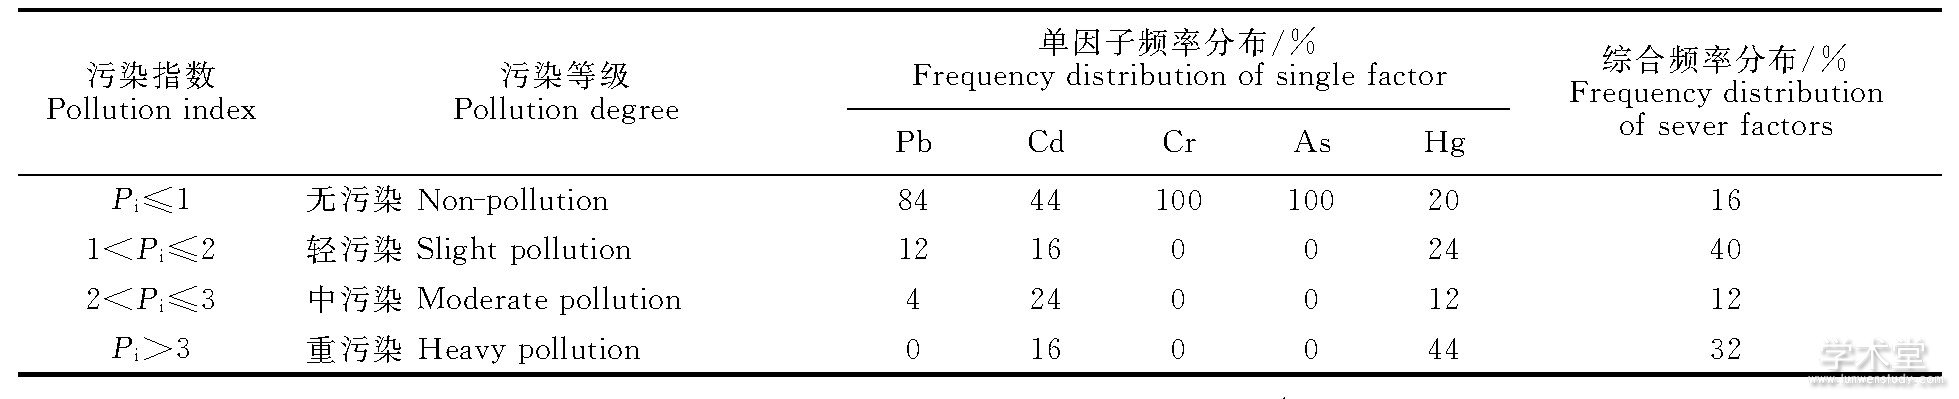 2 ȾȼTable 2 Assessment of heavy metal contamination in farmland soil in Tongguan county